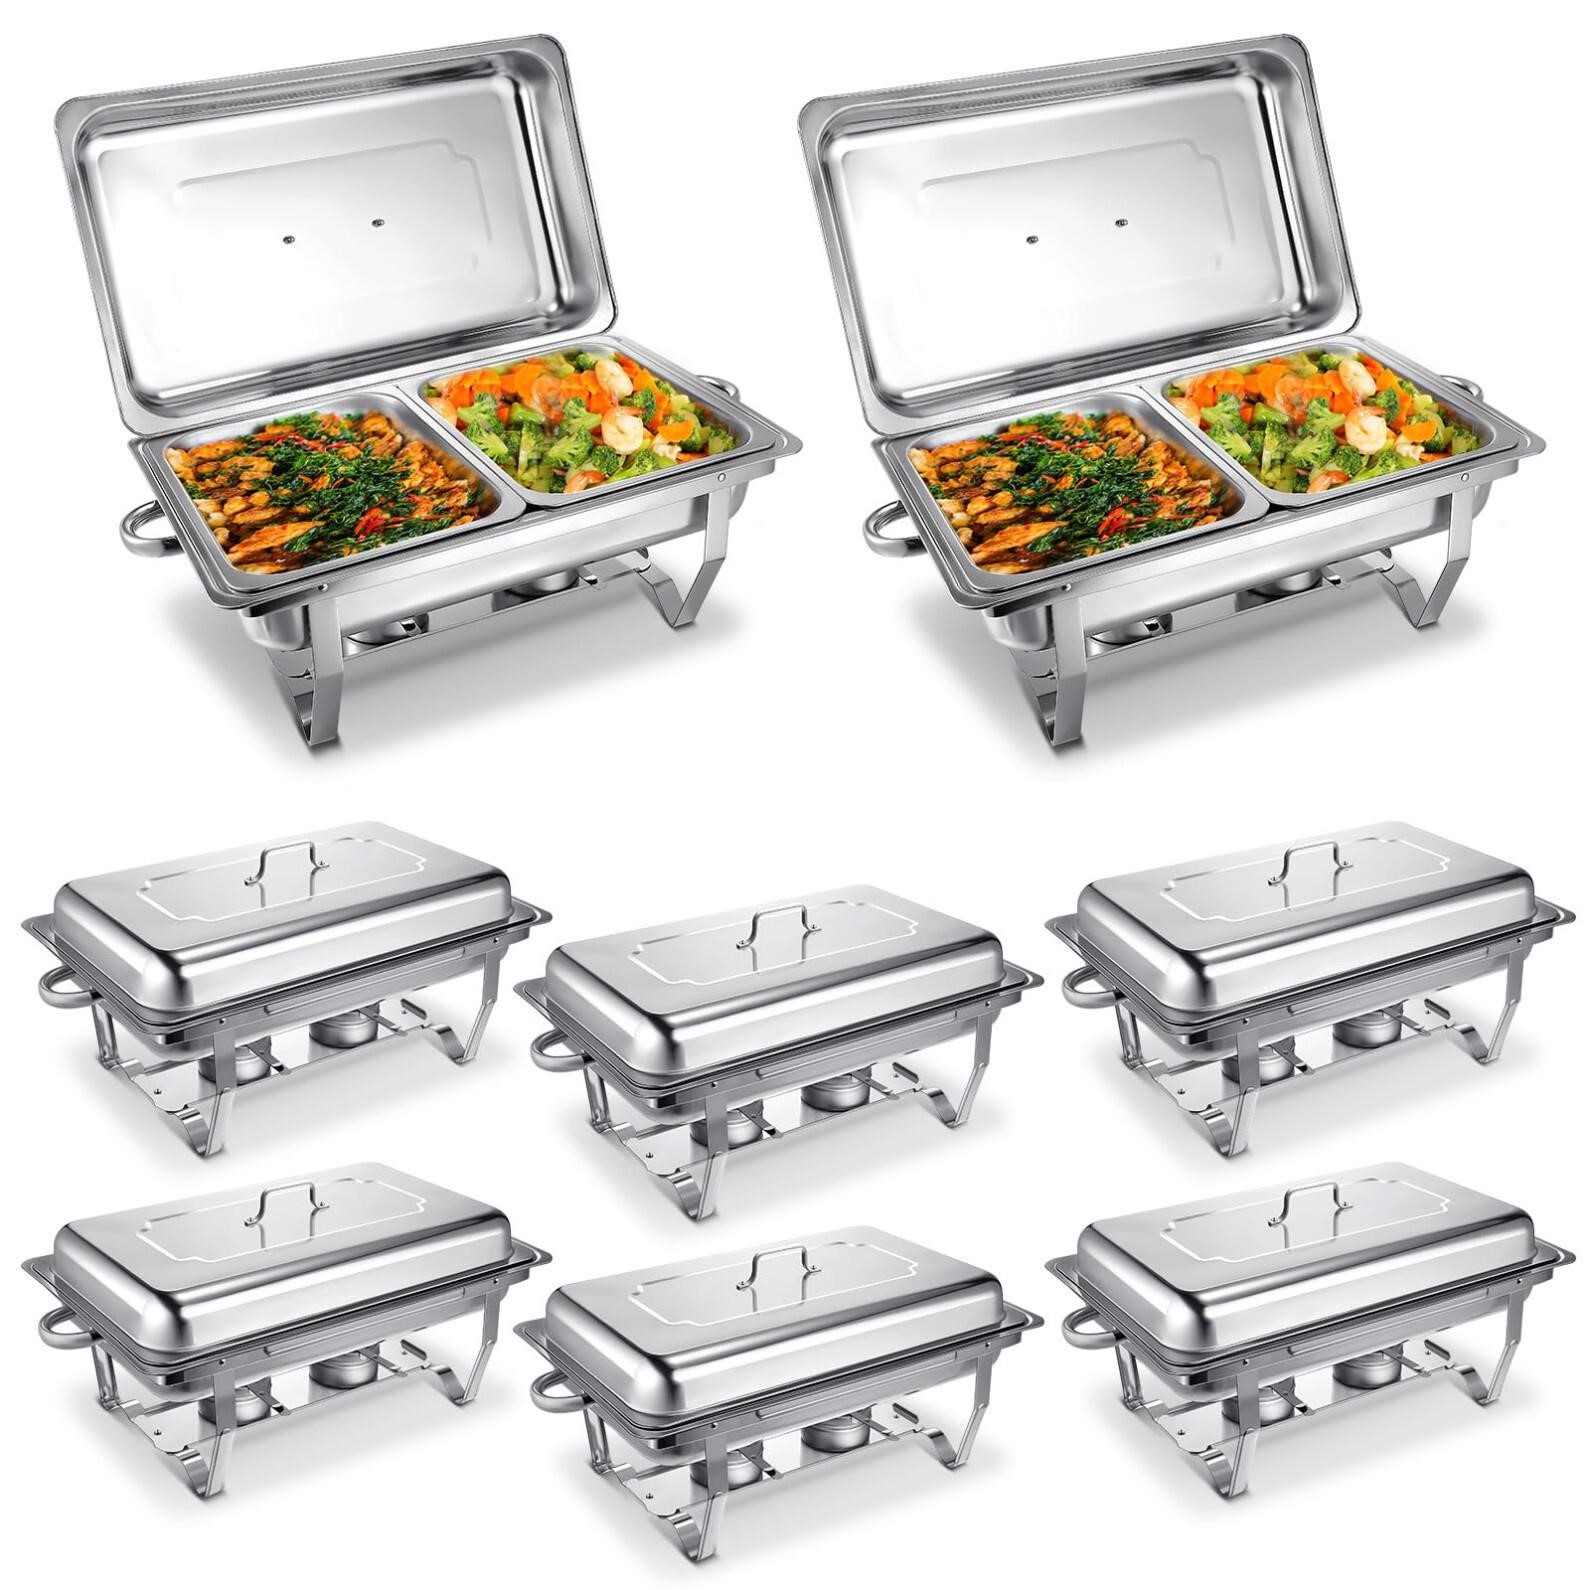 8 Pack 9QT Chafing Dish Buffet Set Stainless Steel